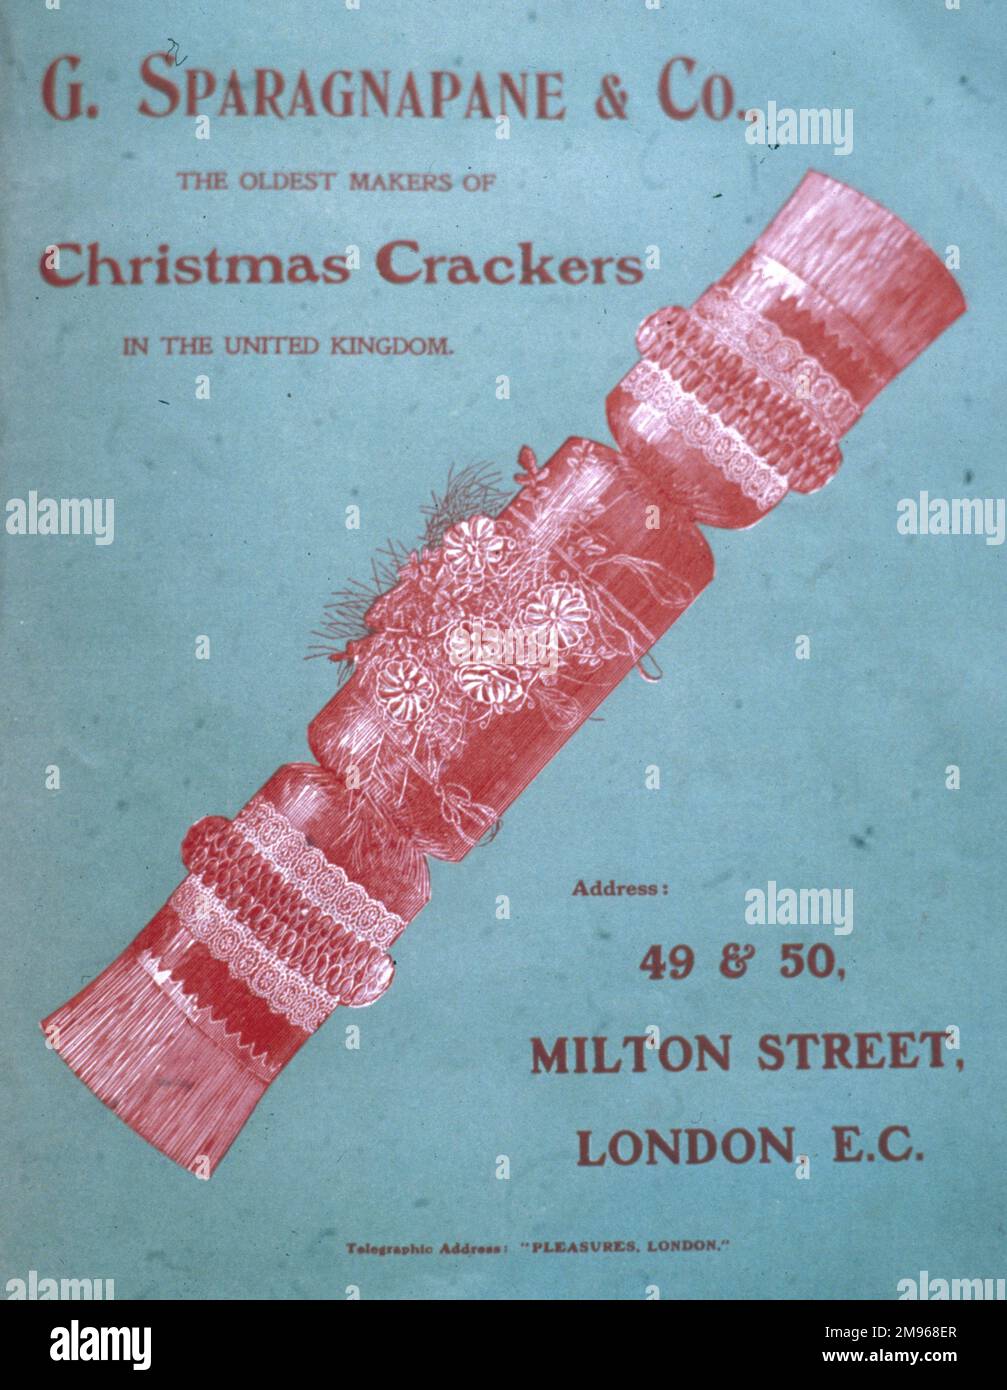 Catalogue for G Sparagnapane Christmas crackers, who claim to be the oldest manufacturer in the United Kingdom. Stock Photo